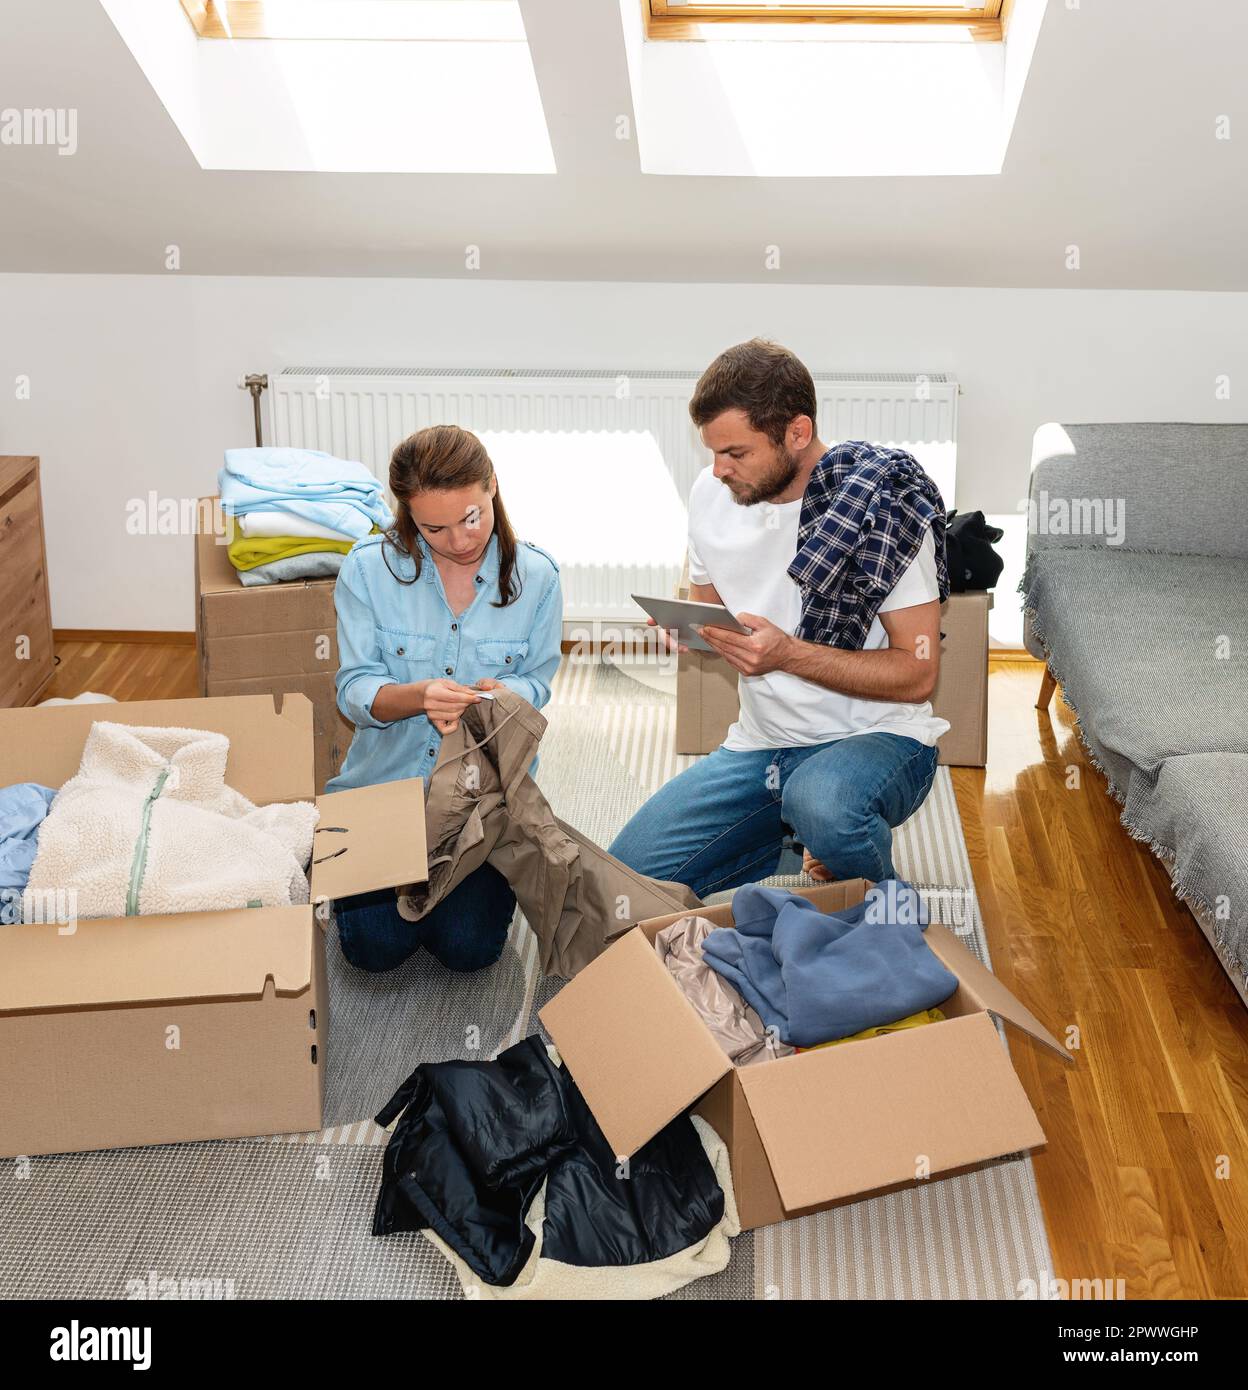 Volunteers woman and man inventory and packing clothes for donation. Stock Photo